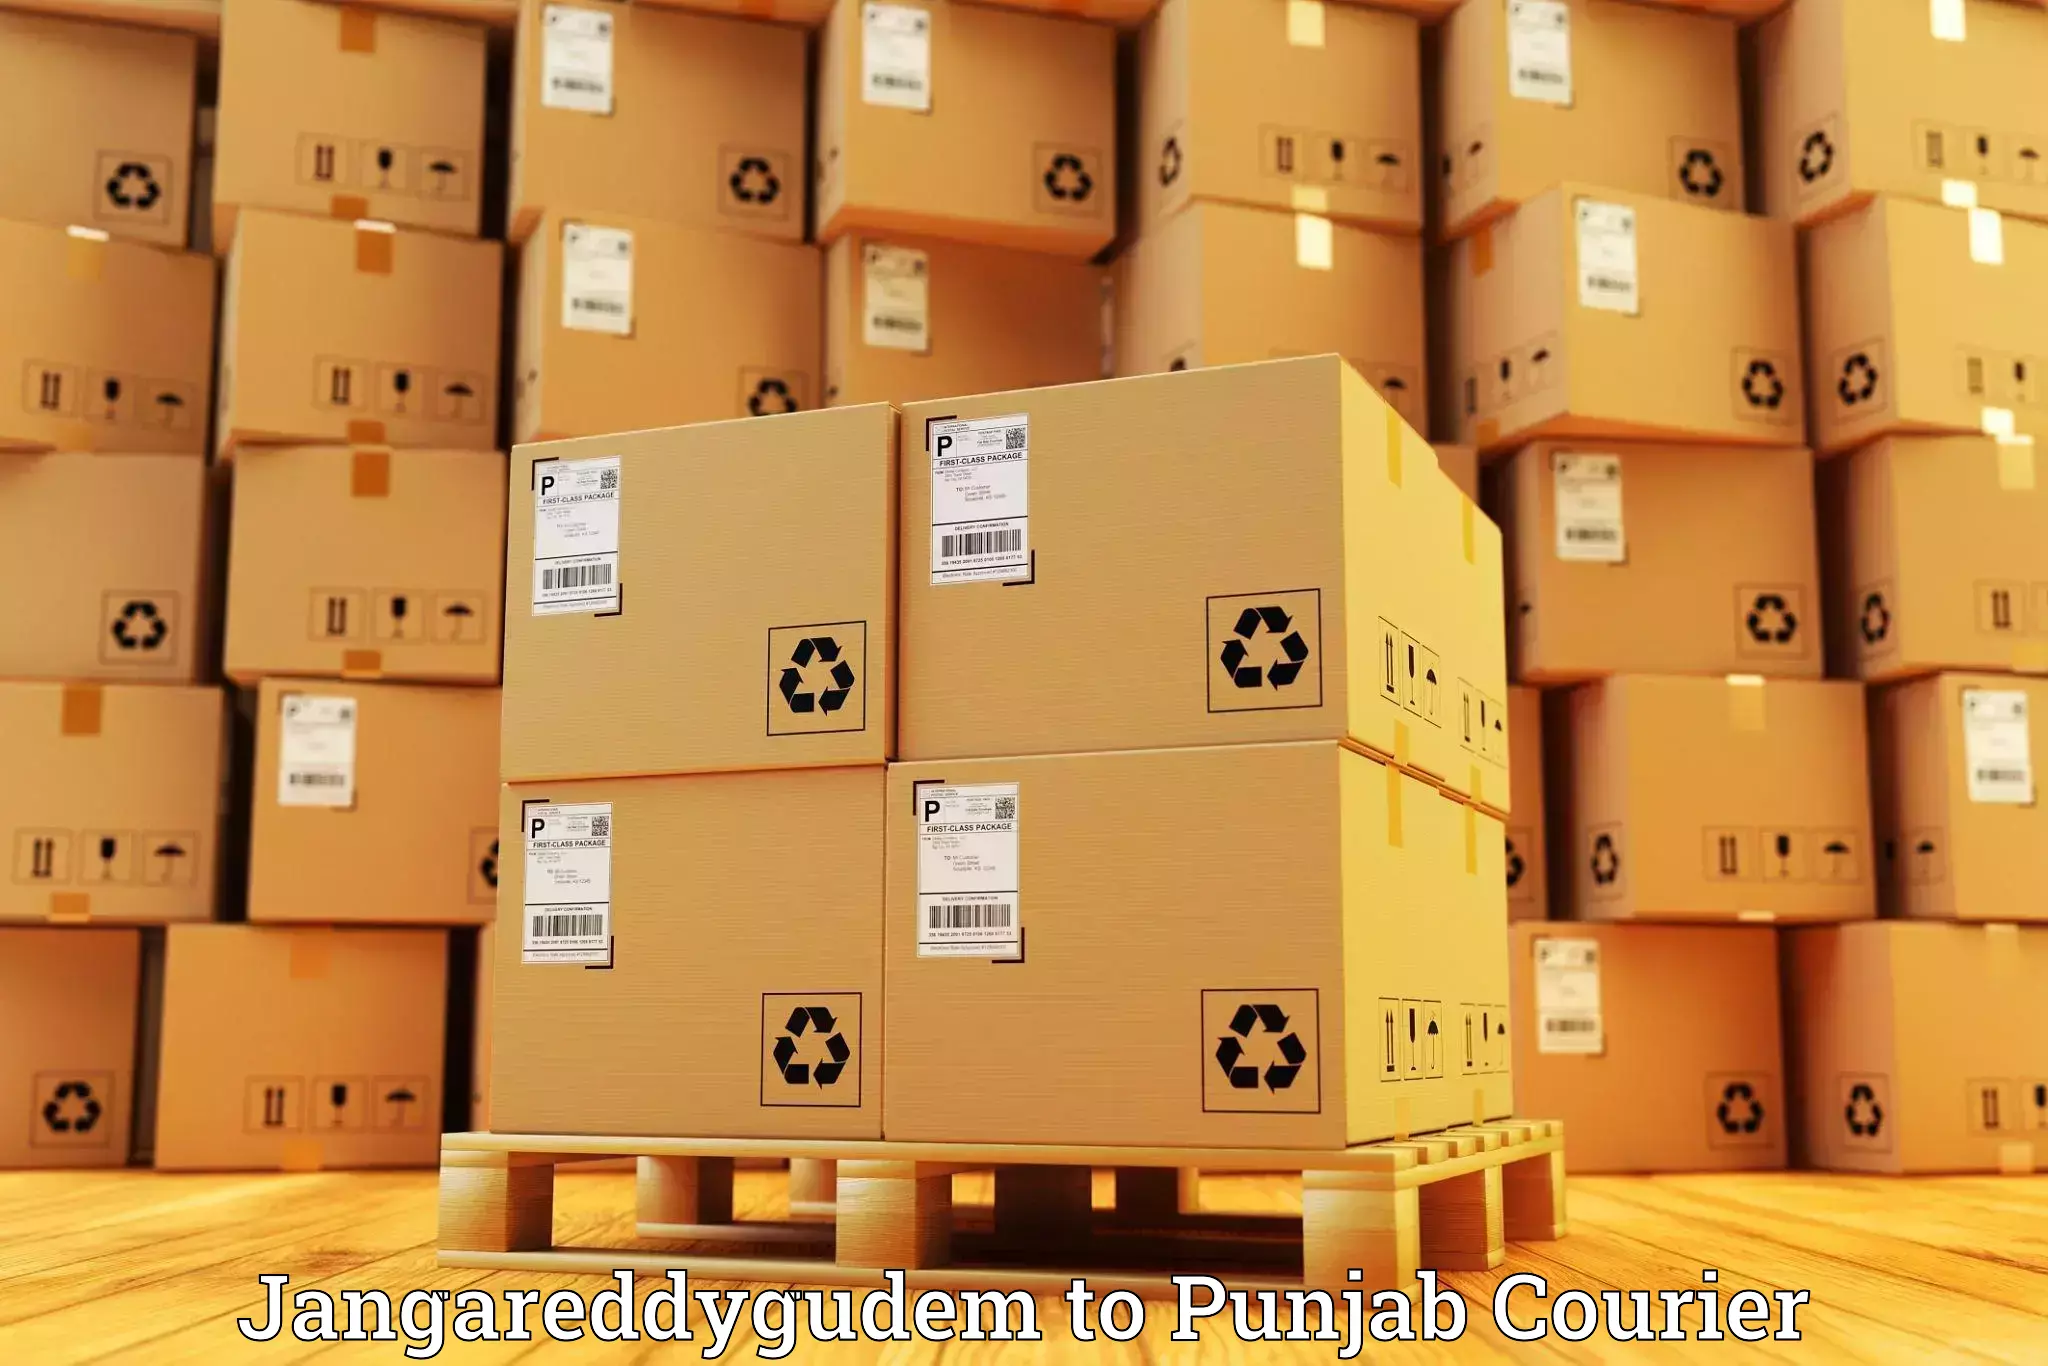 24/7 shipping services Jangareddygudem to Malout